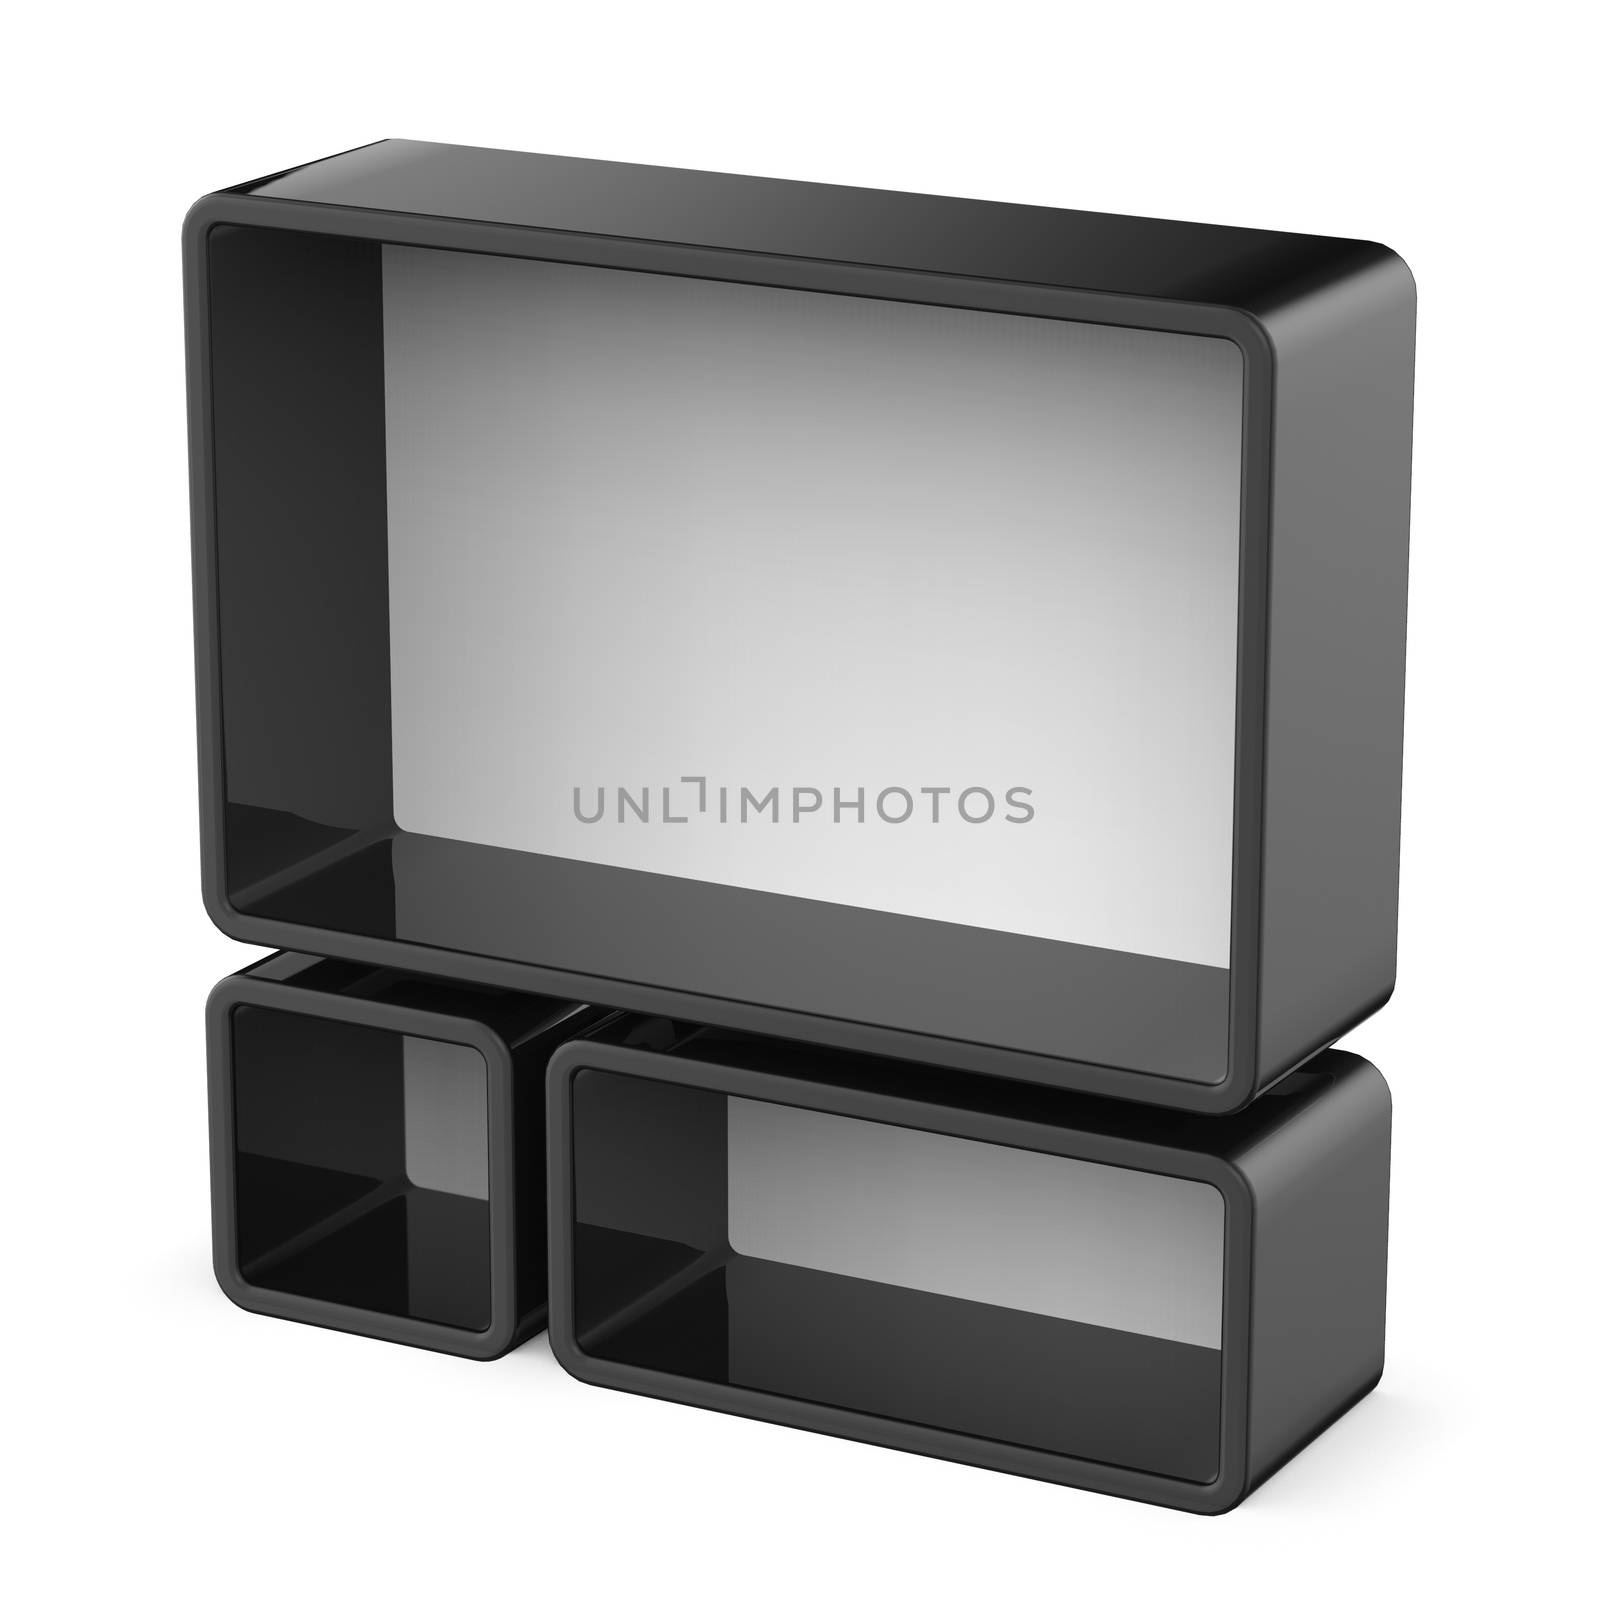 Copy space black and white shelf set 3D render illustration isolated on white background